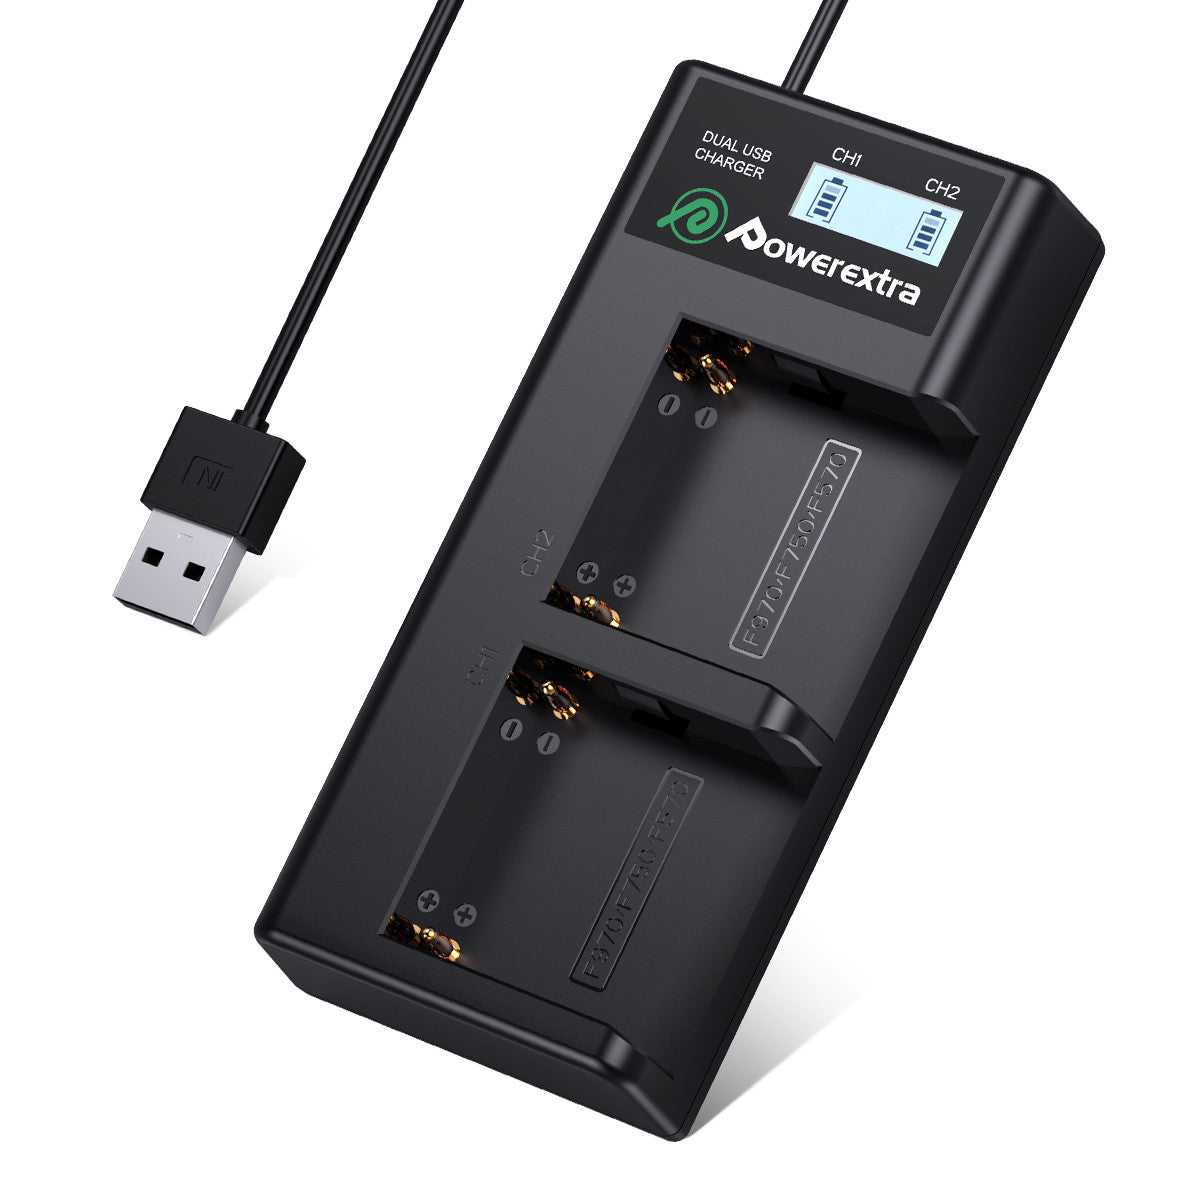 Powerextra Sony NP-F970 Battery Charger with USB LCD Display